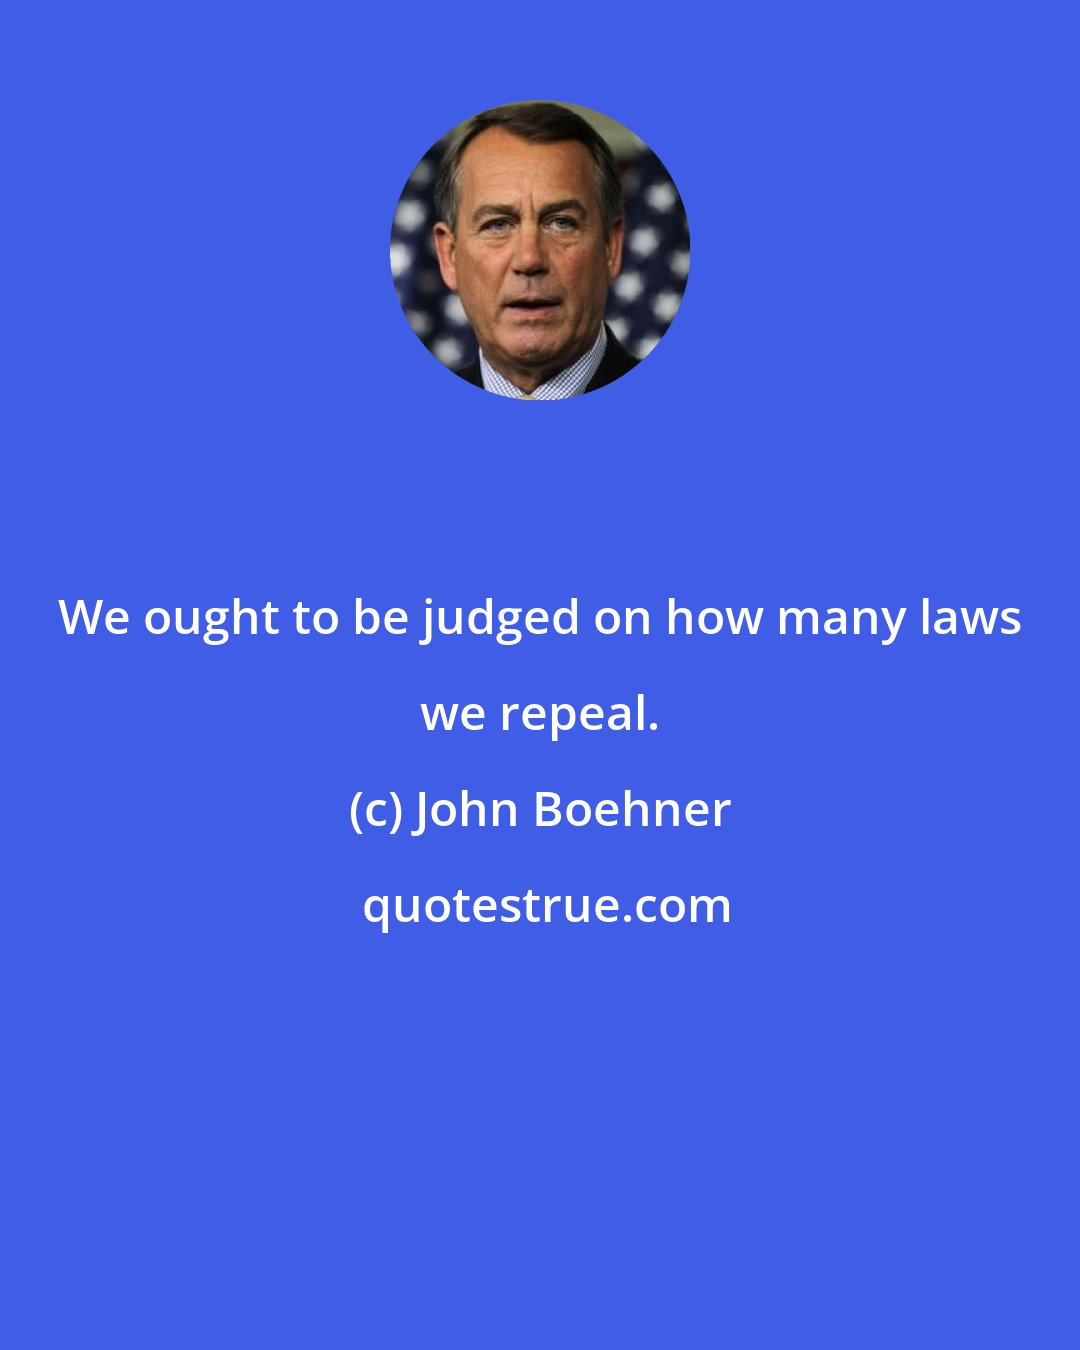 John Boehner: We ought to be judged on how many laws we repeal.